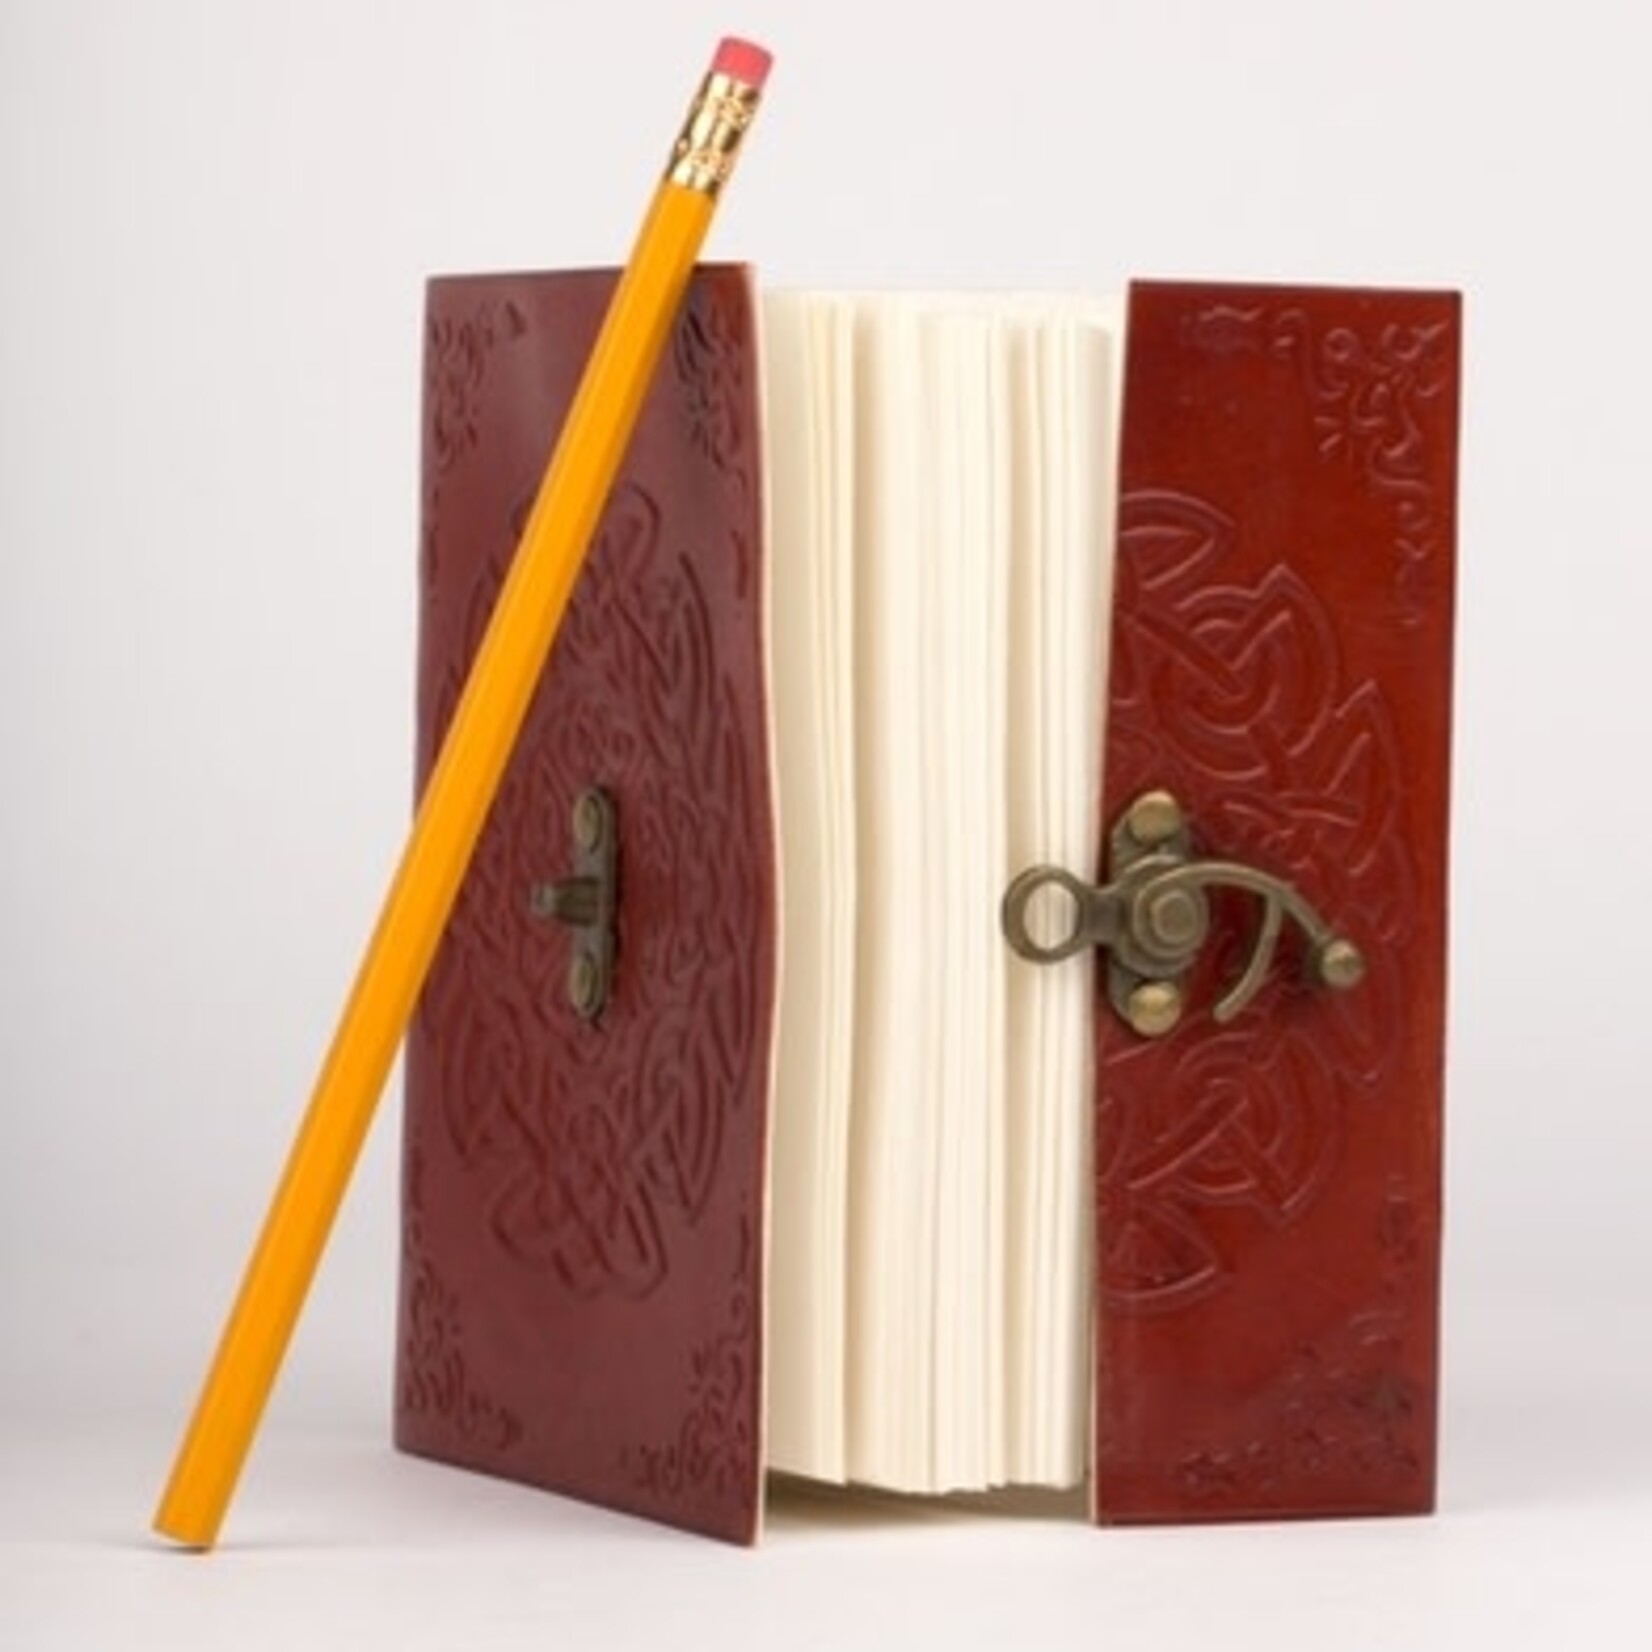 Ten Thousand Villages USA Endless Knot Leather Journal, India